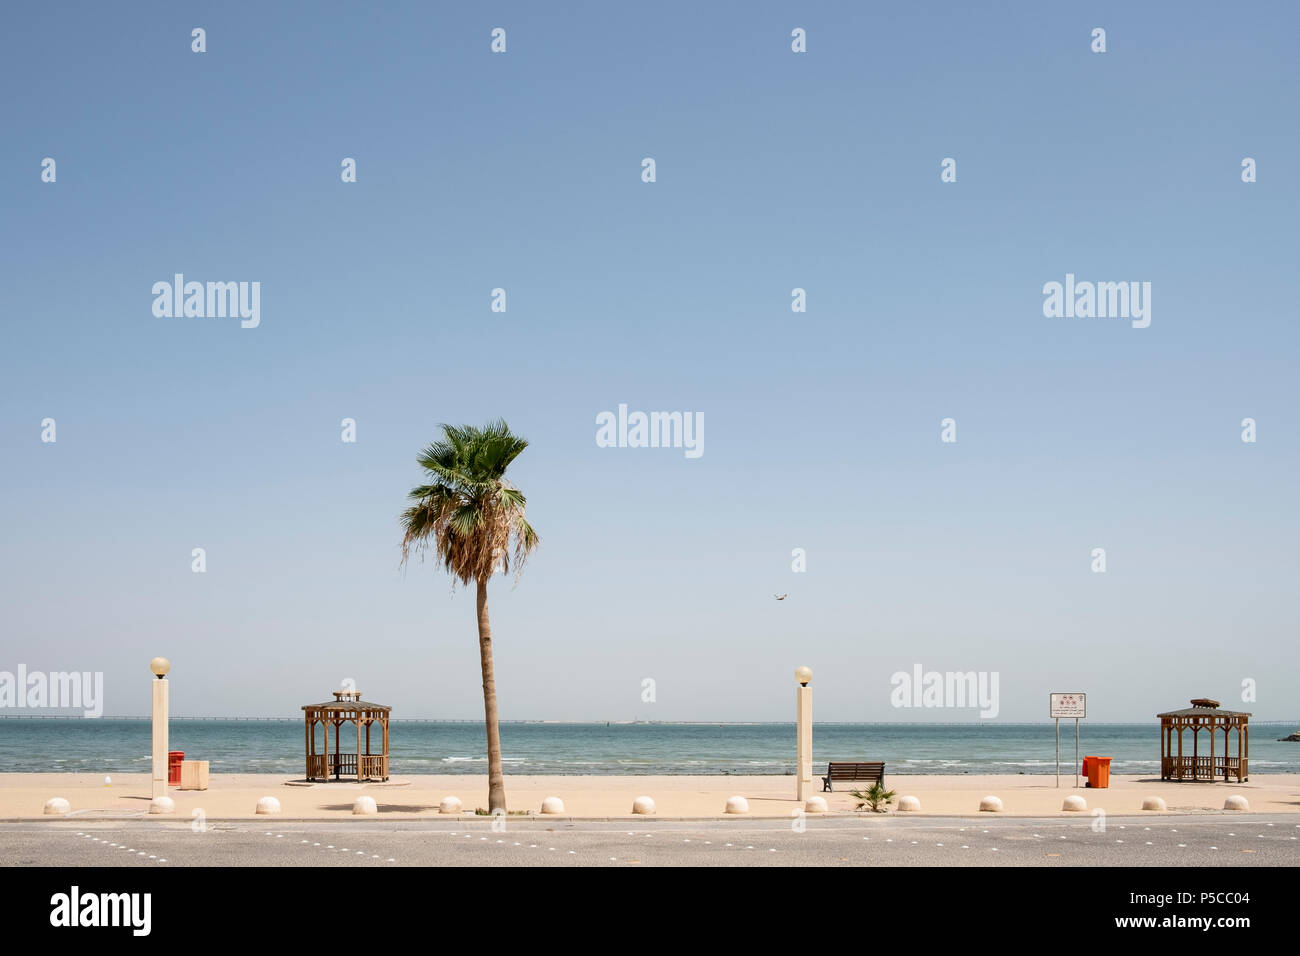 View of beach front at Kuwait City in Kuwait Stock Photo